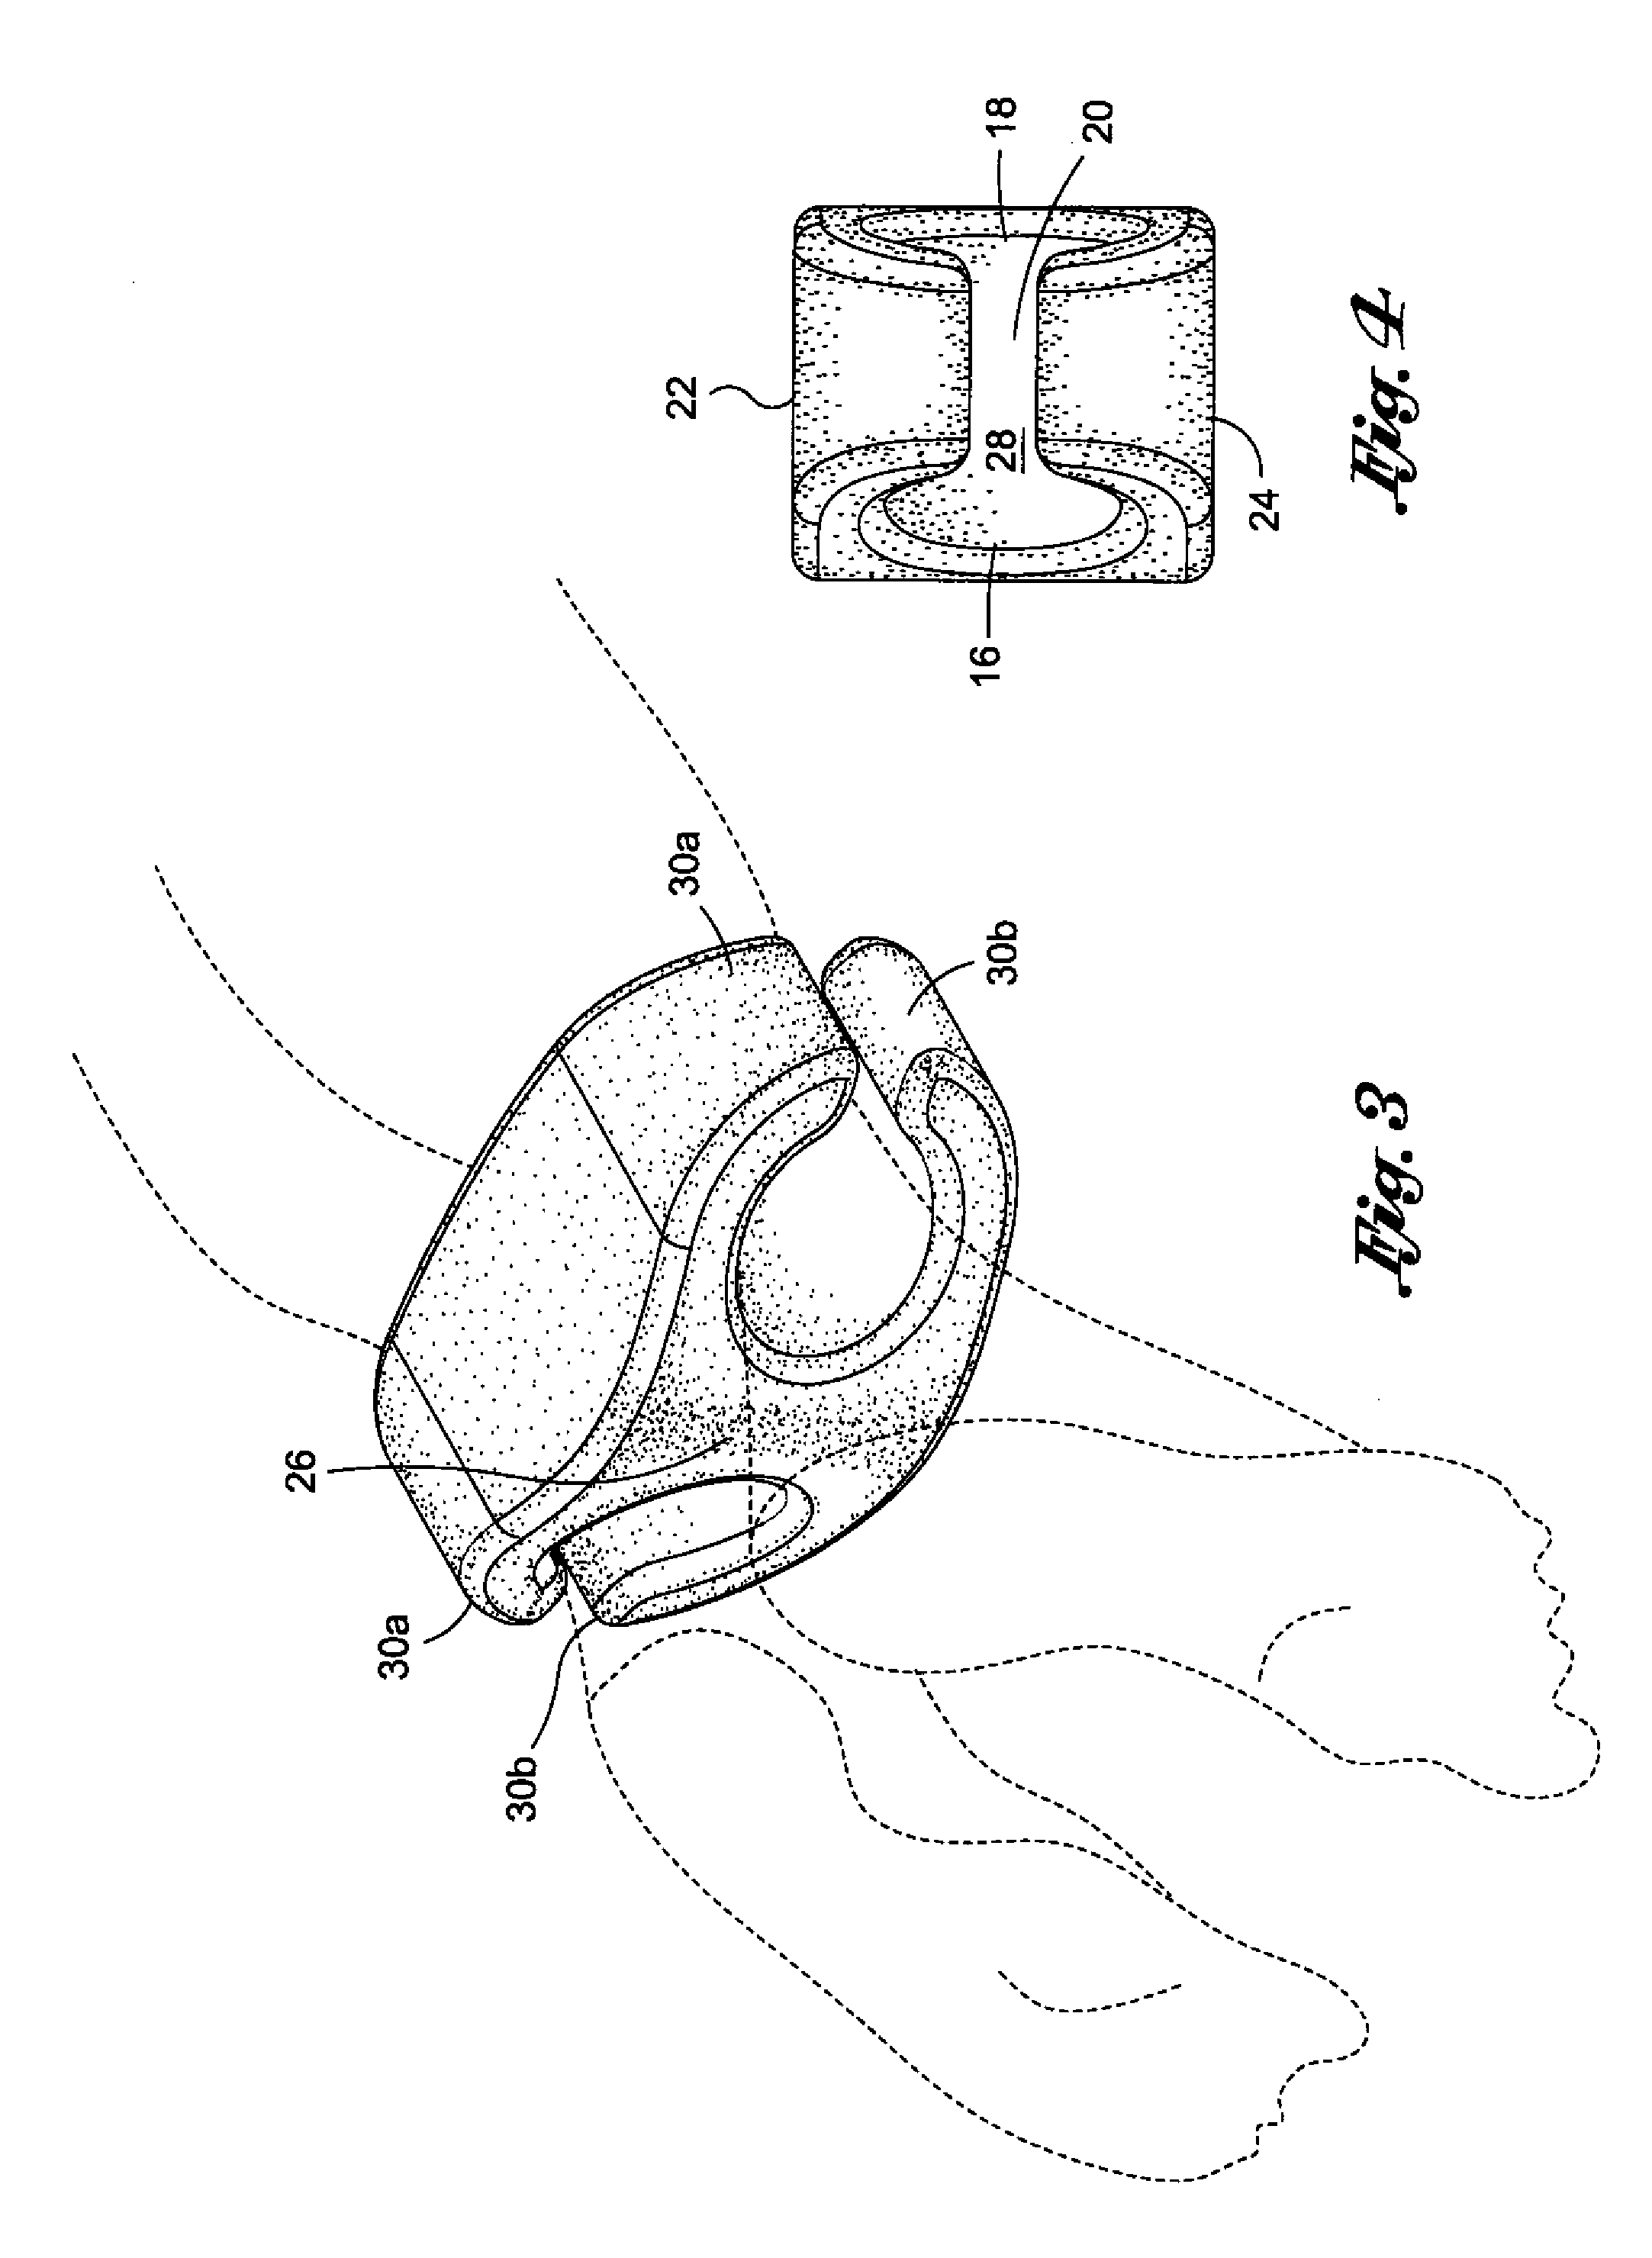 Ankle float buoy